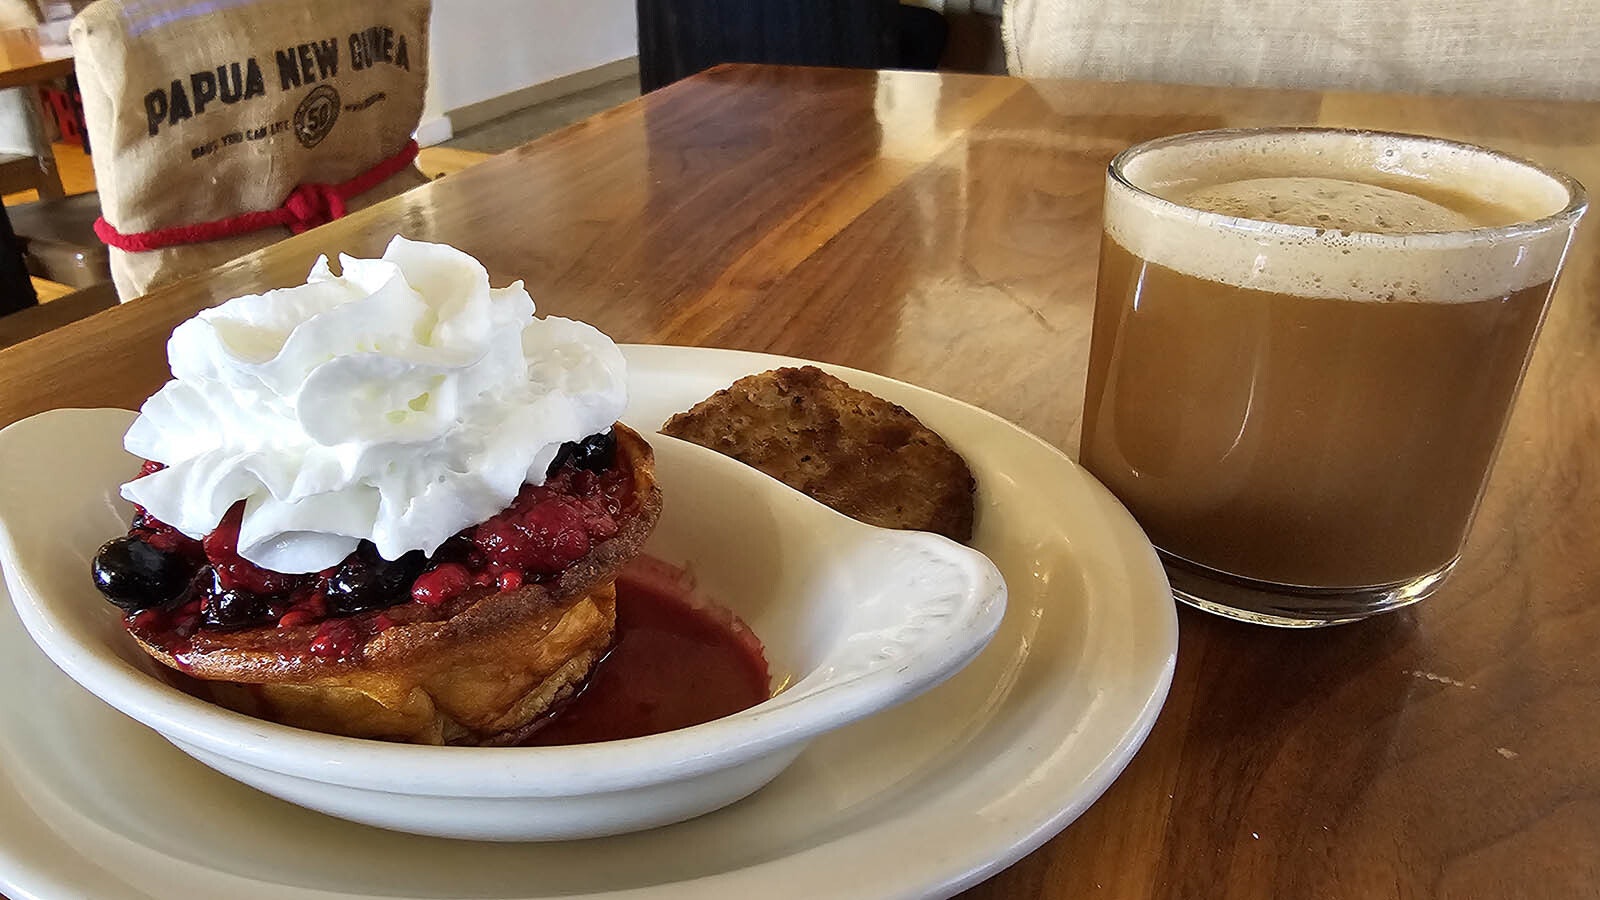 The Dutch baby is topped with a berry compote and whipped cream. It goes well with a side of sausage and a latte.